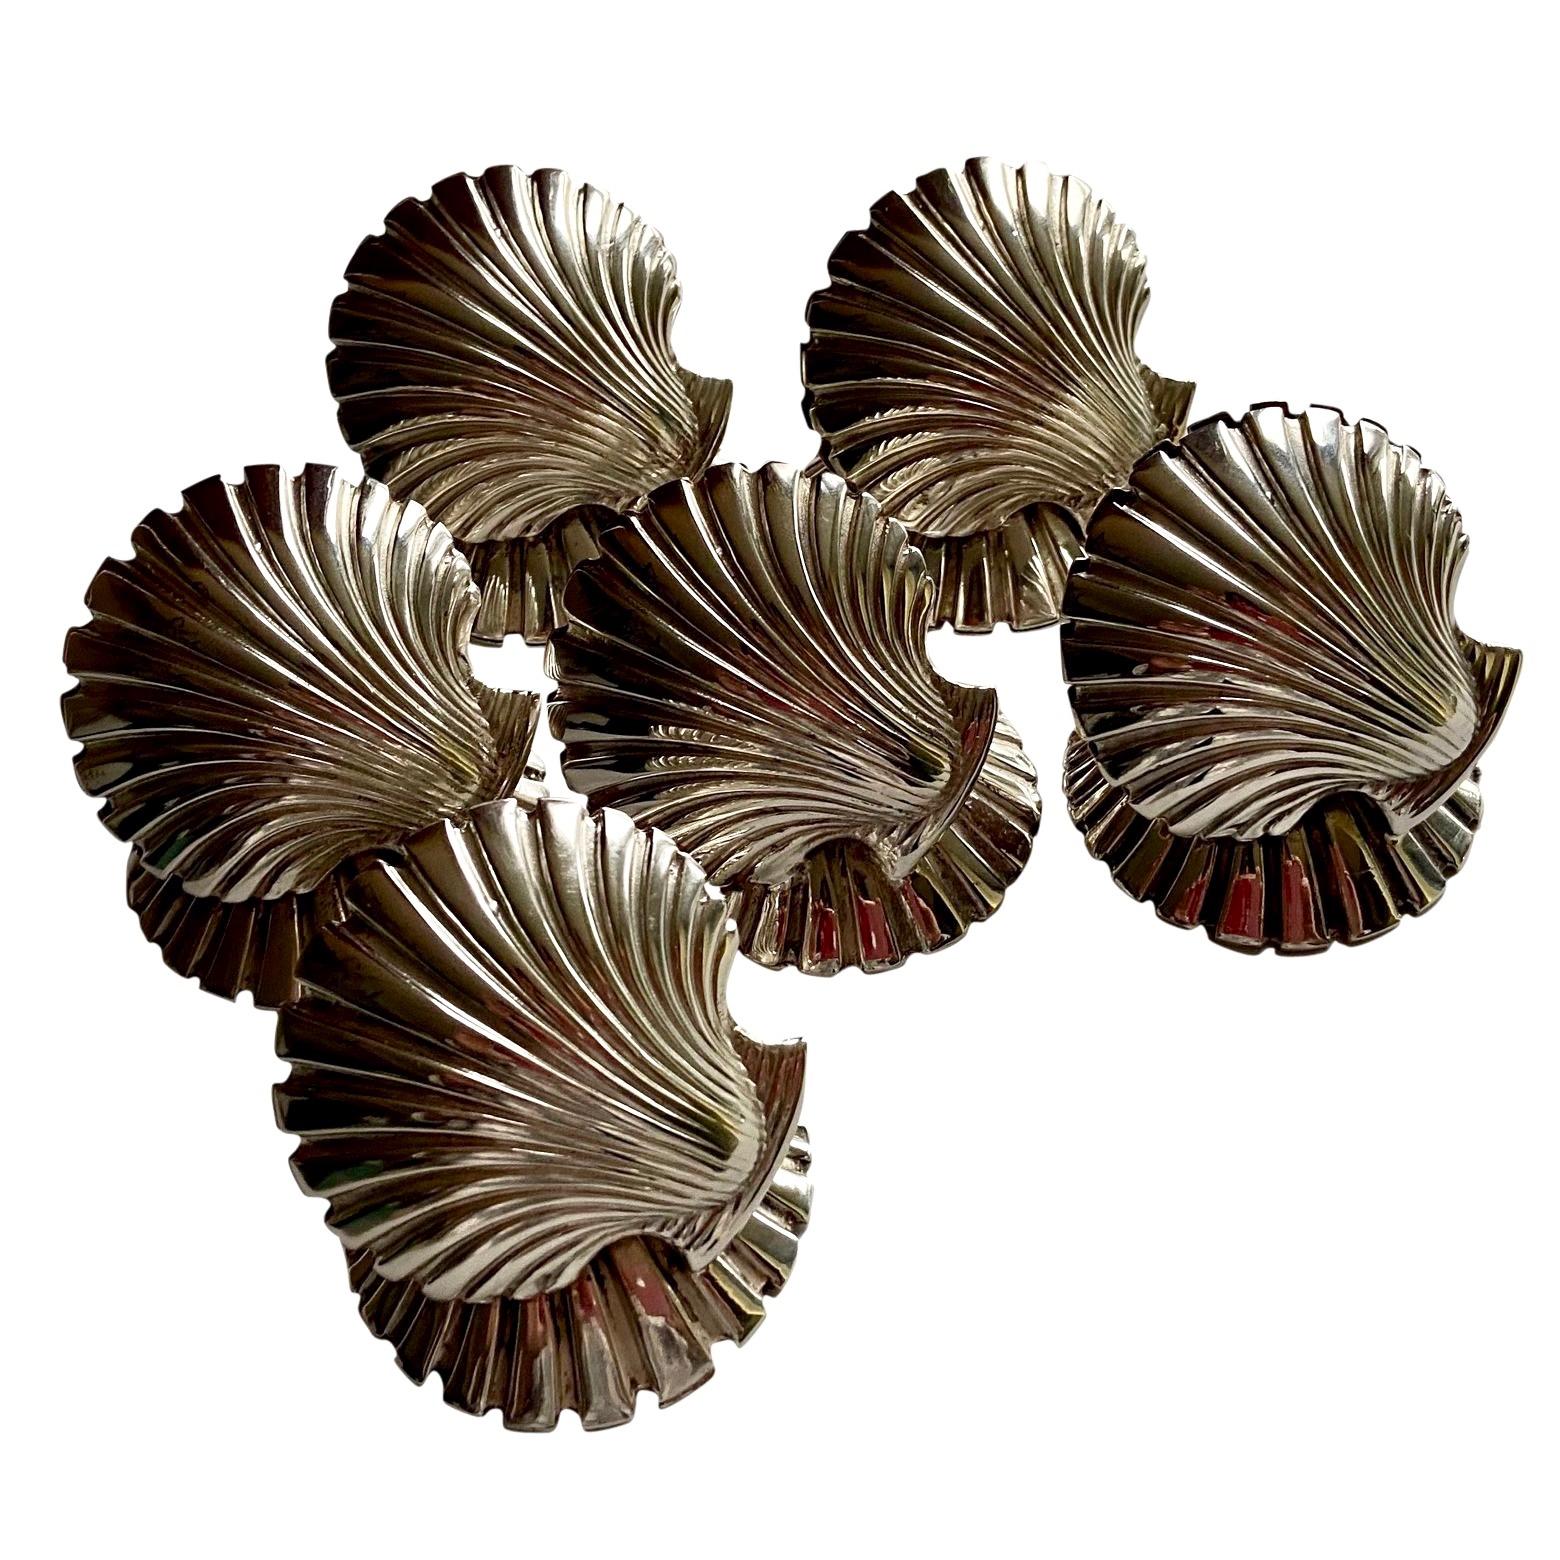 6 Vintage 1940s-1950s Silver Plated Shells, Place Card Holders, Fratelli Broggi For Sale 2